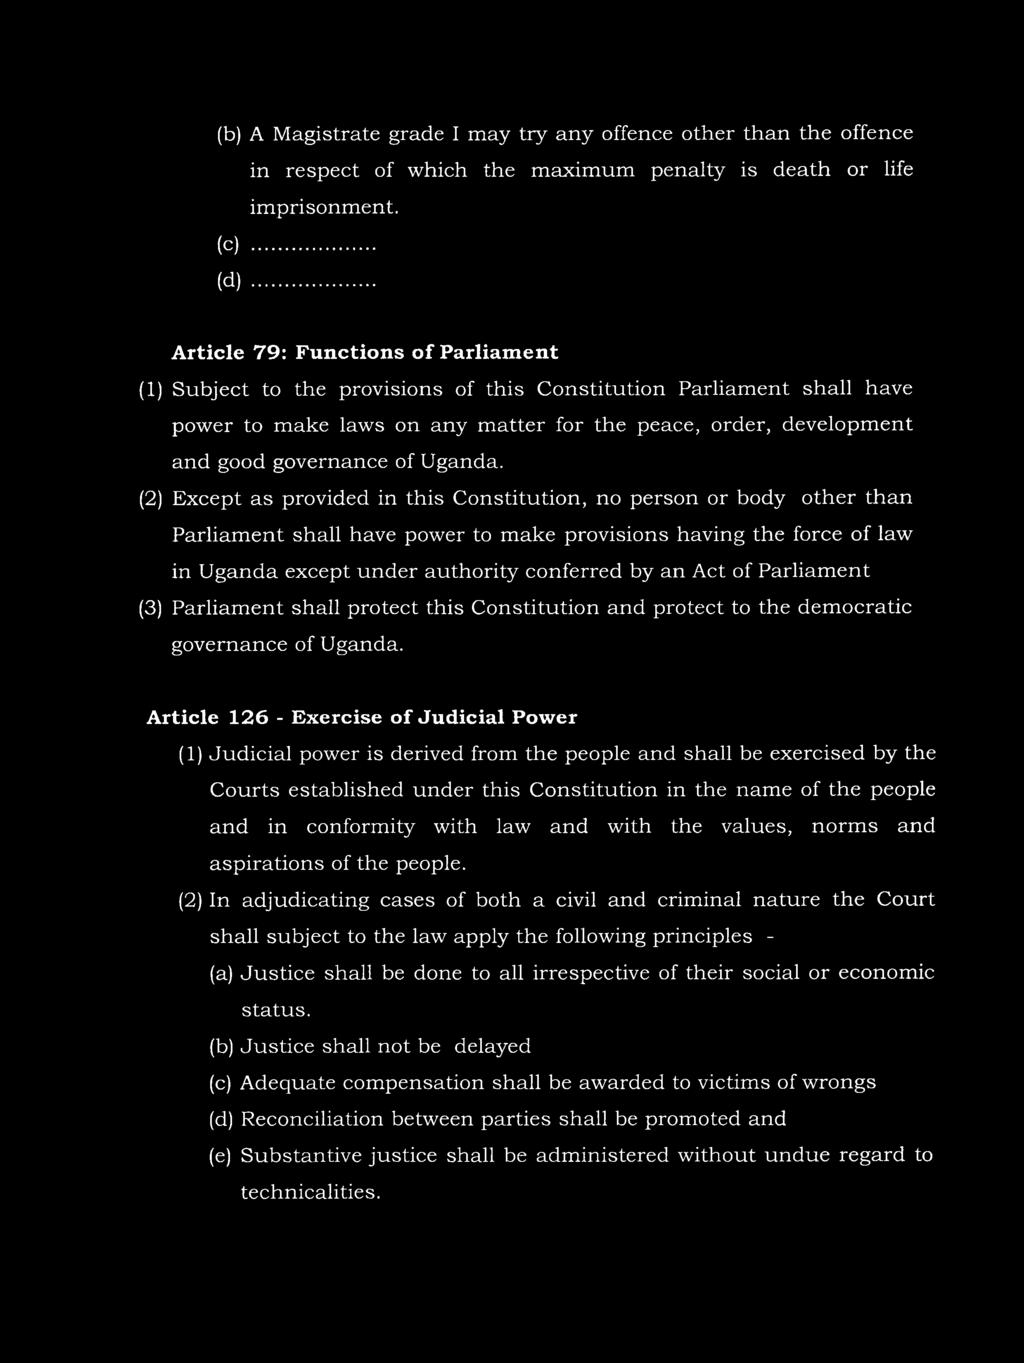 of Parliament (3) Parliament shall protect this Constitution and protect to the democratic  Article 126 - Exercise of Judicial Power (1) Judicial power is derived from the people and shall be